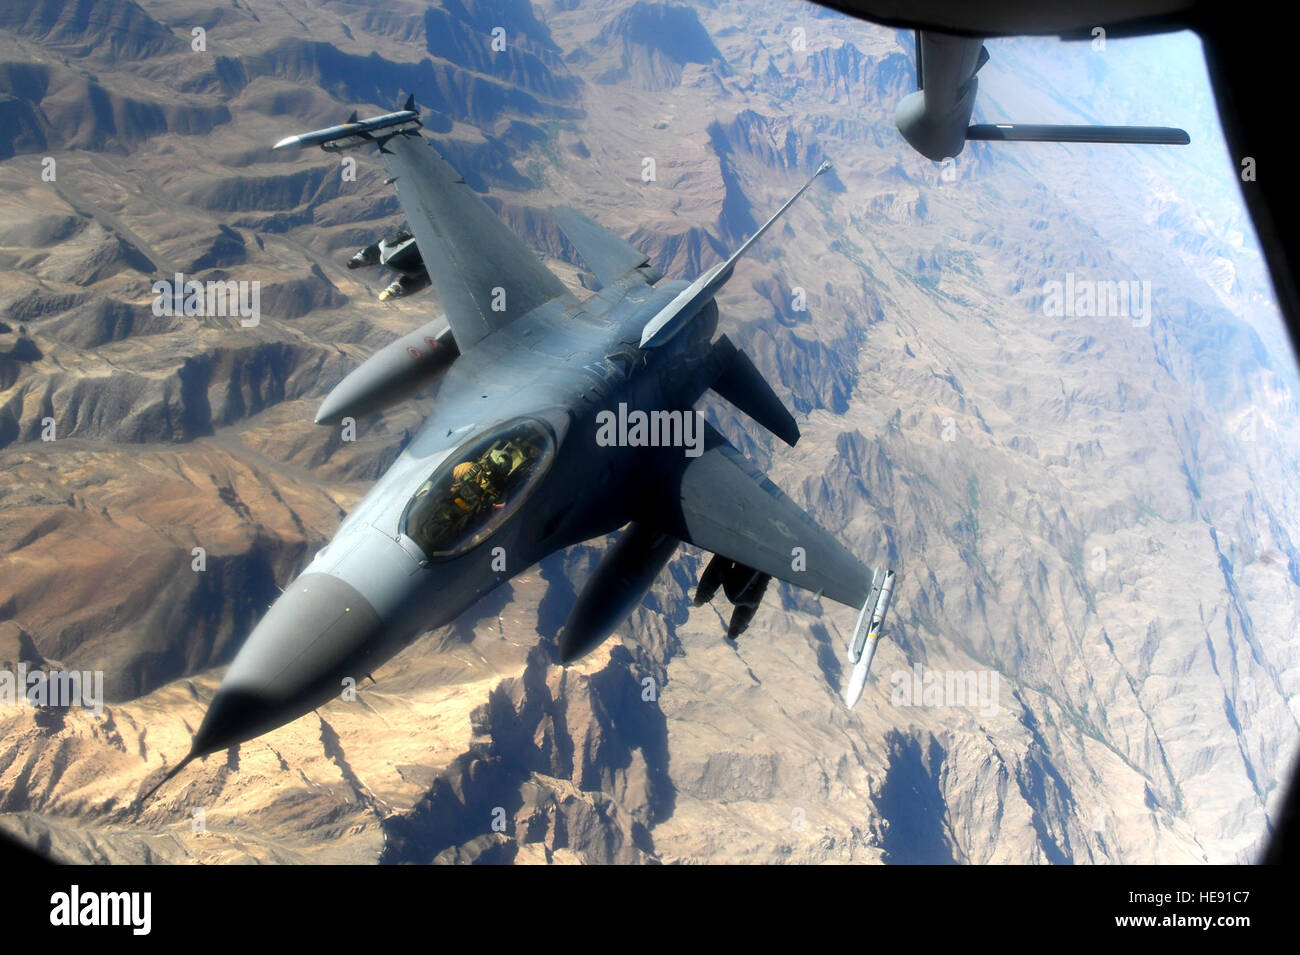 A F-16 Fighting Falcon, from the 555th Expeditionary Fighter Squadron, returns to mission after being refueled by a KC-135 Stratotanker, from the 340th Expeditionary Air Refueling Squadron, during an air refueling mission in the skies of Afghanistan supporting Operation Enduring Freedom, May 12, 2011.  Master Sgt. William Greer) Stock Photo